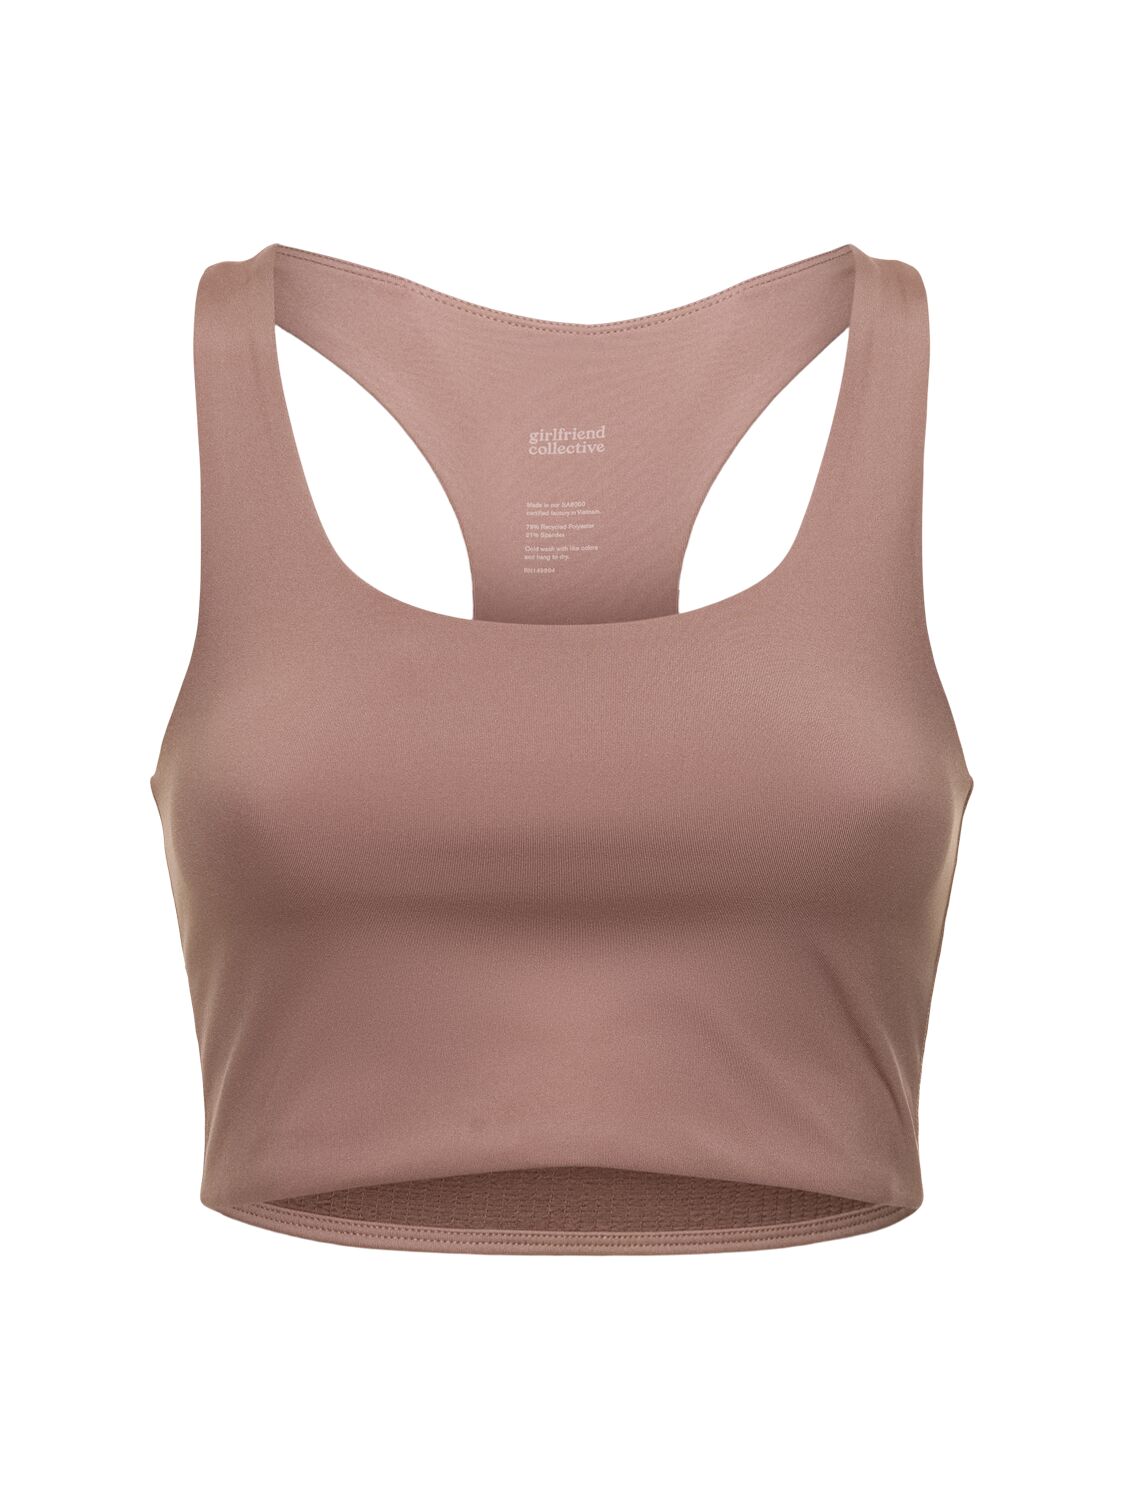 Girlfriend Collective Paloma Stretch Tech Bra Top In Brown